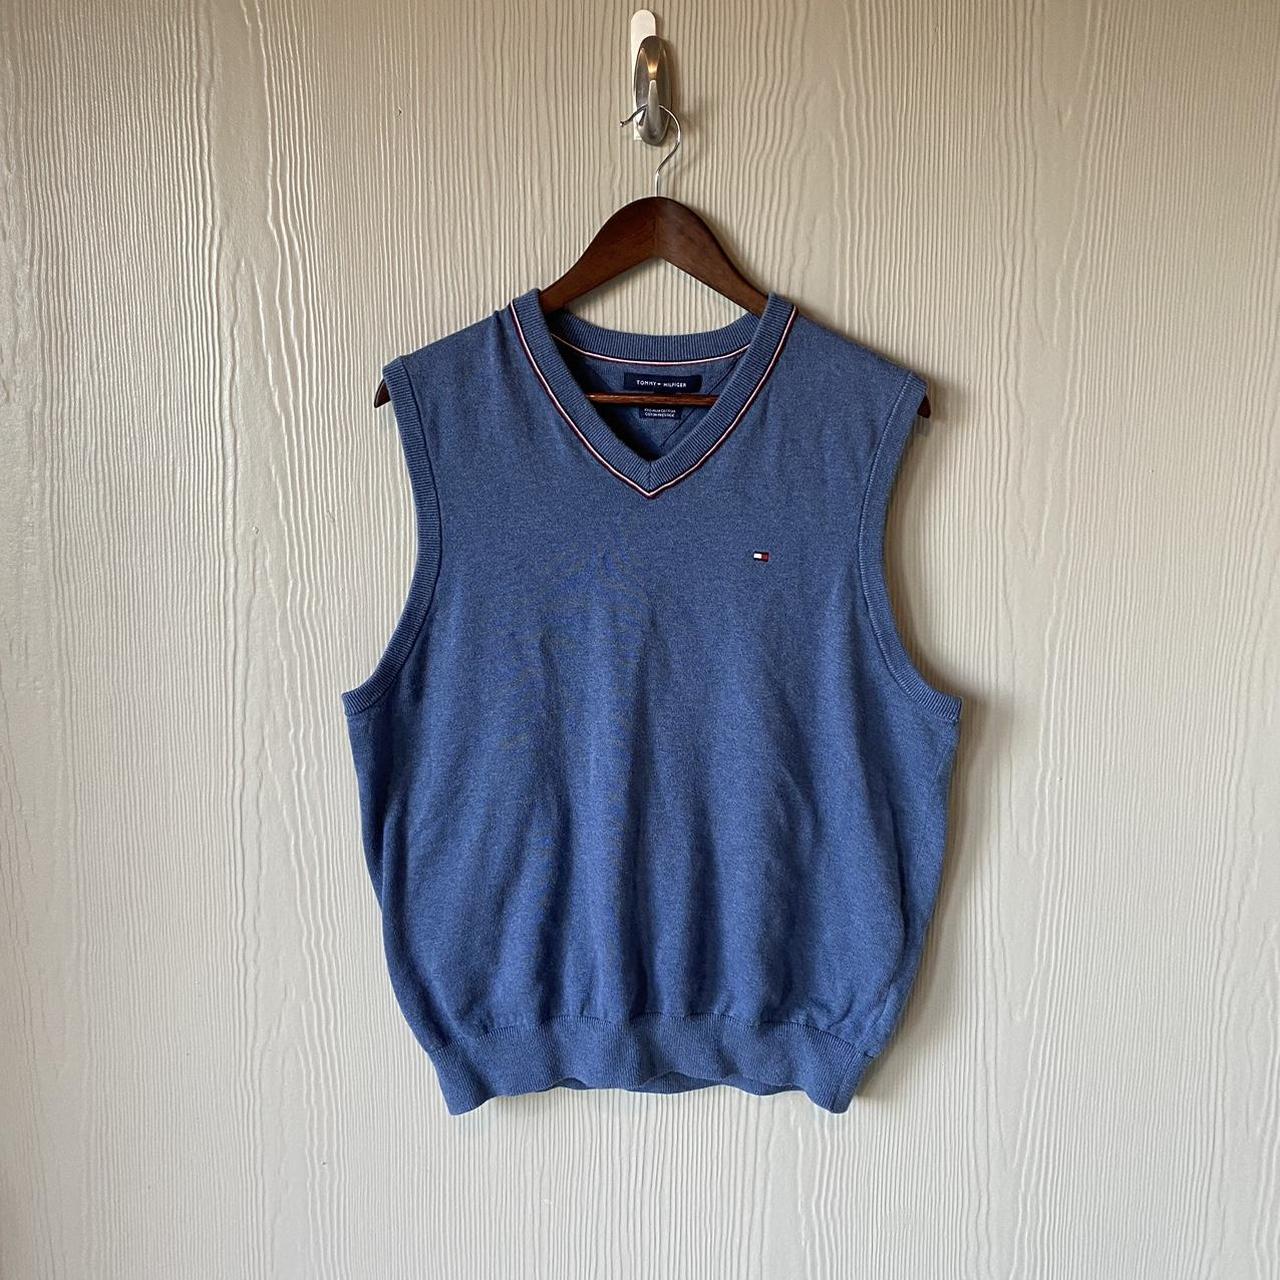 Tommy Hilfiger sweater vest Message us with any... - Depop